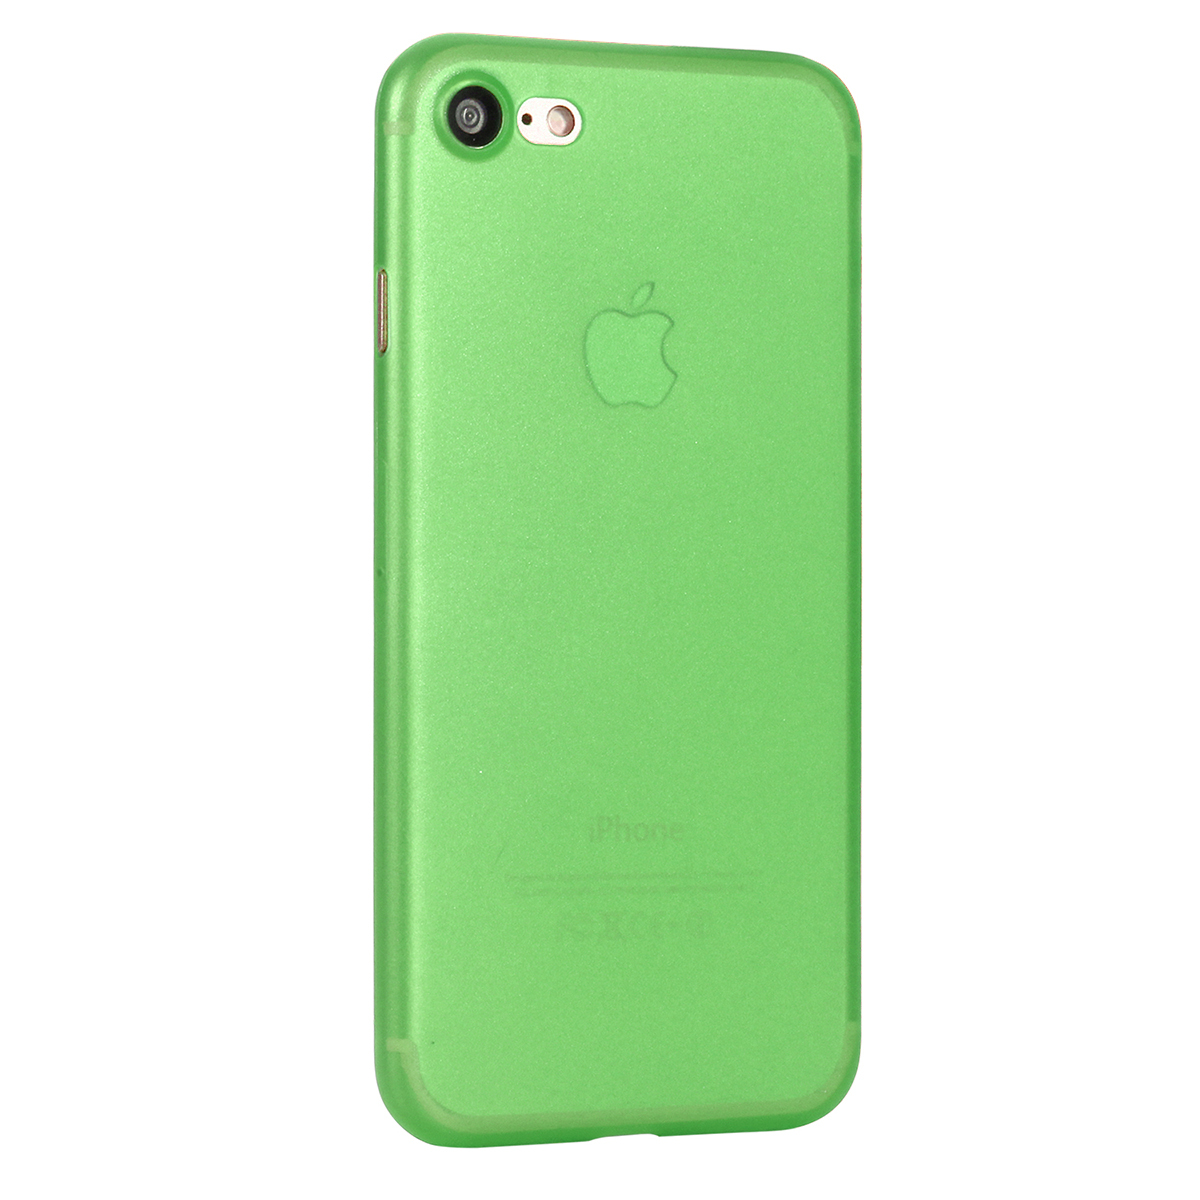 Ultra Slim Full Cover Frosted PC Phone Cover Case for iPhone 7/8 - Green